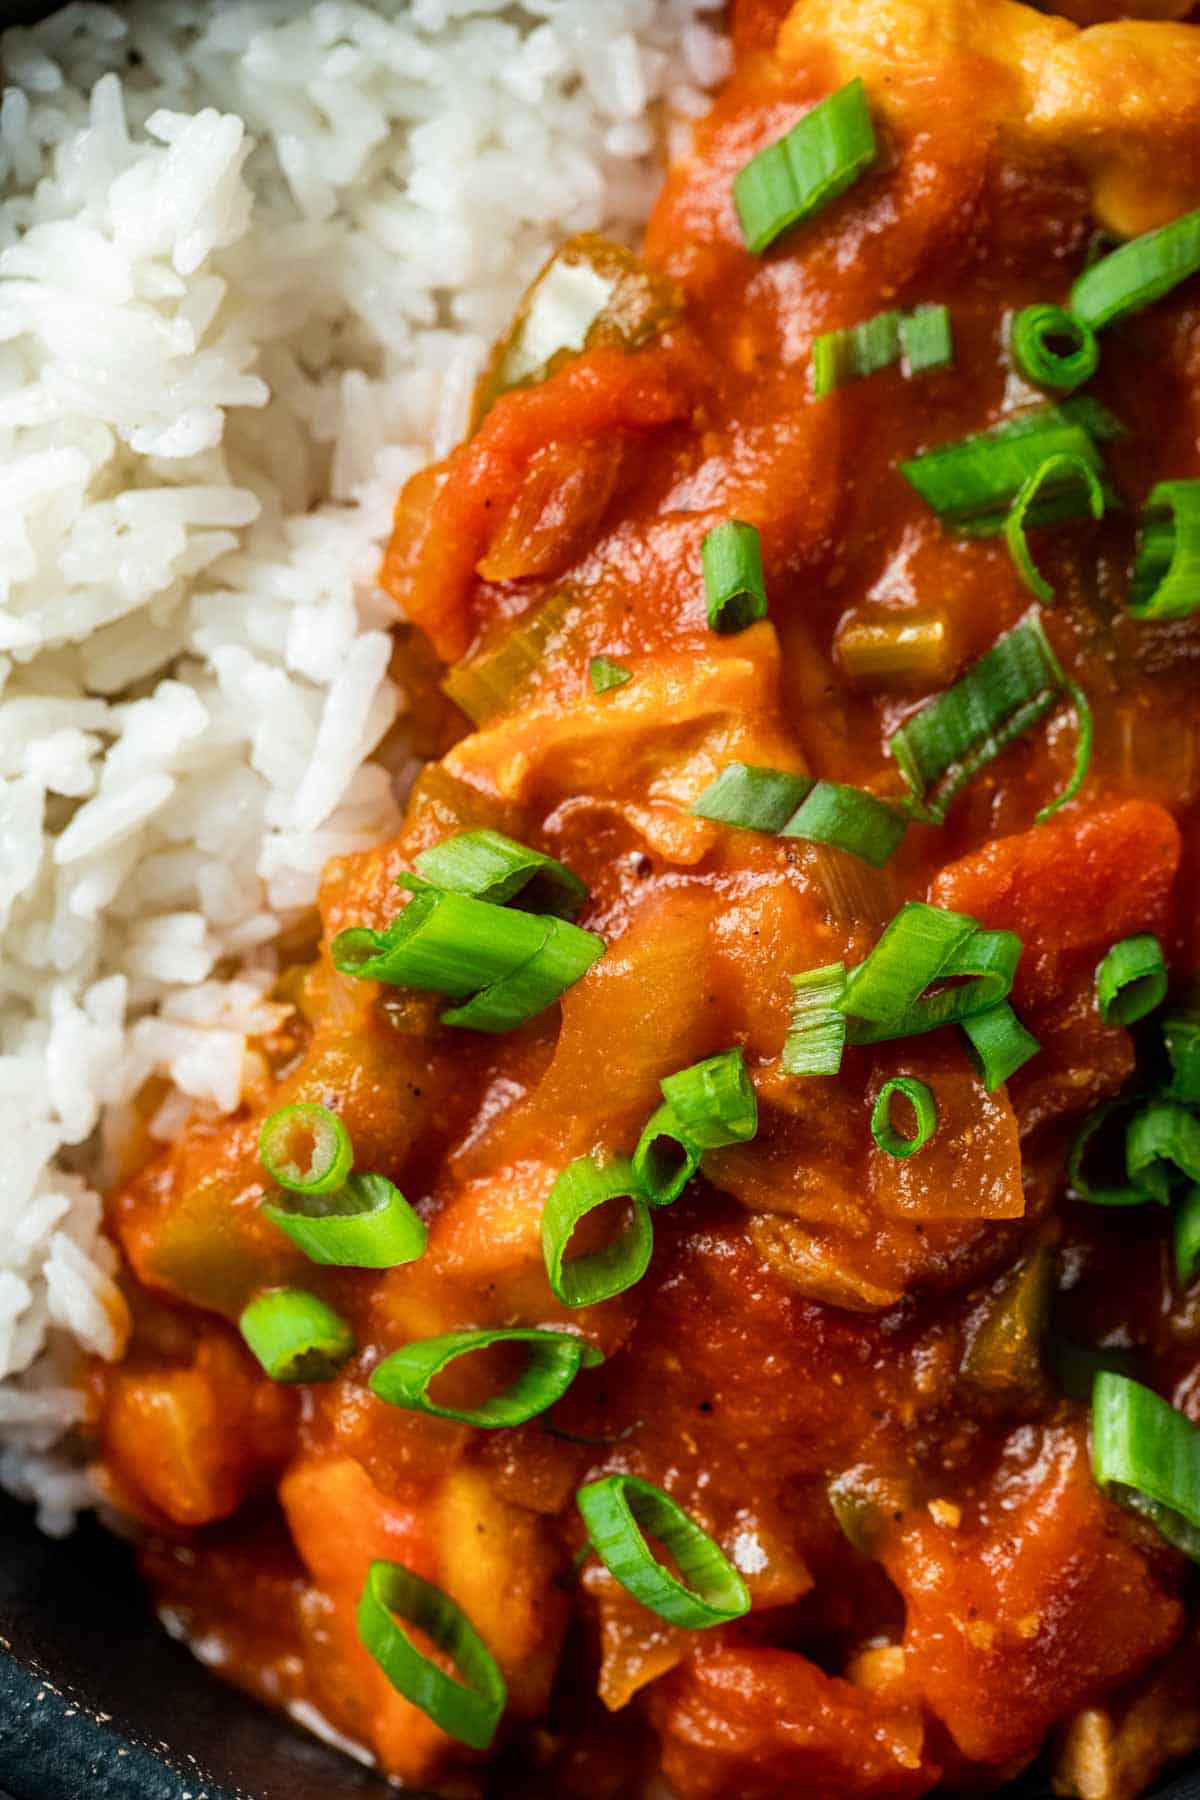 chicken in a red sauce served with green onions and rice on the side